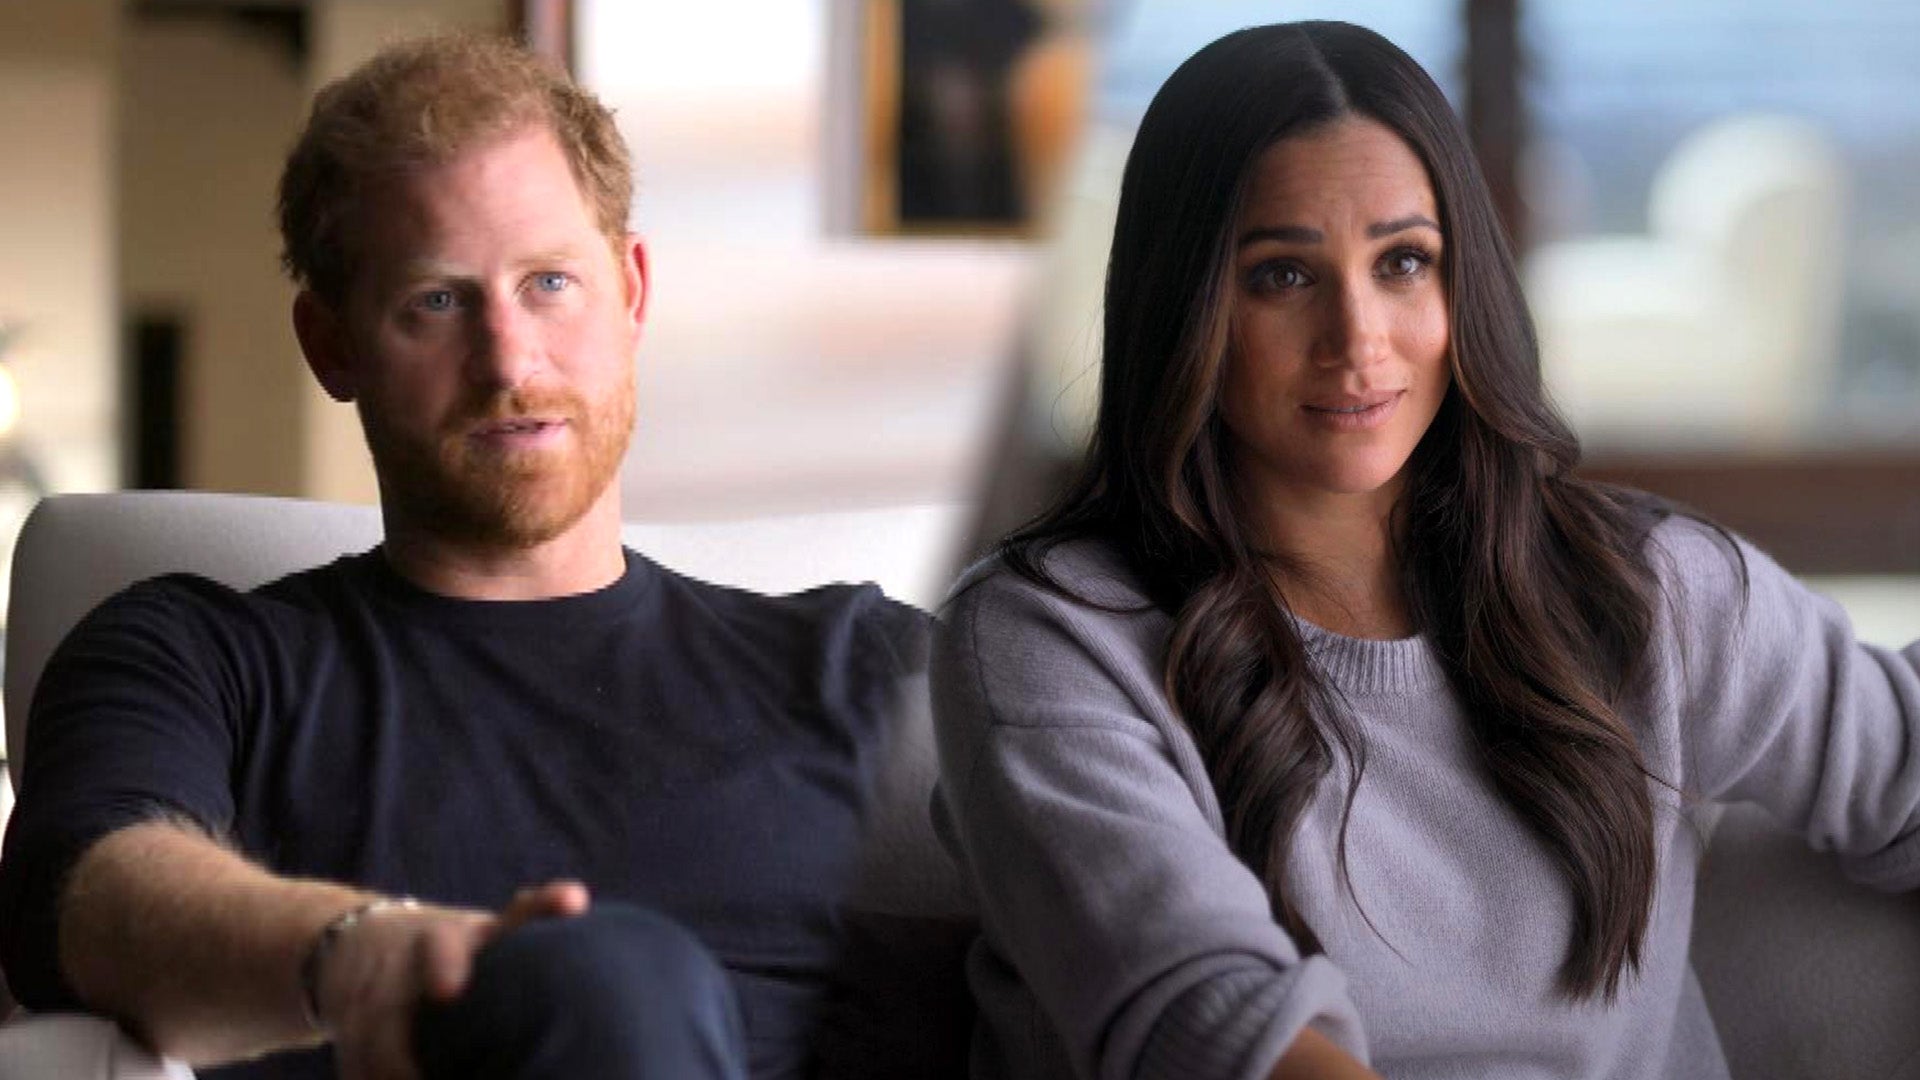 Prince Harry and Meghan Markle's Netflix Docuseries: What to Expect